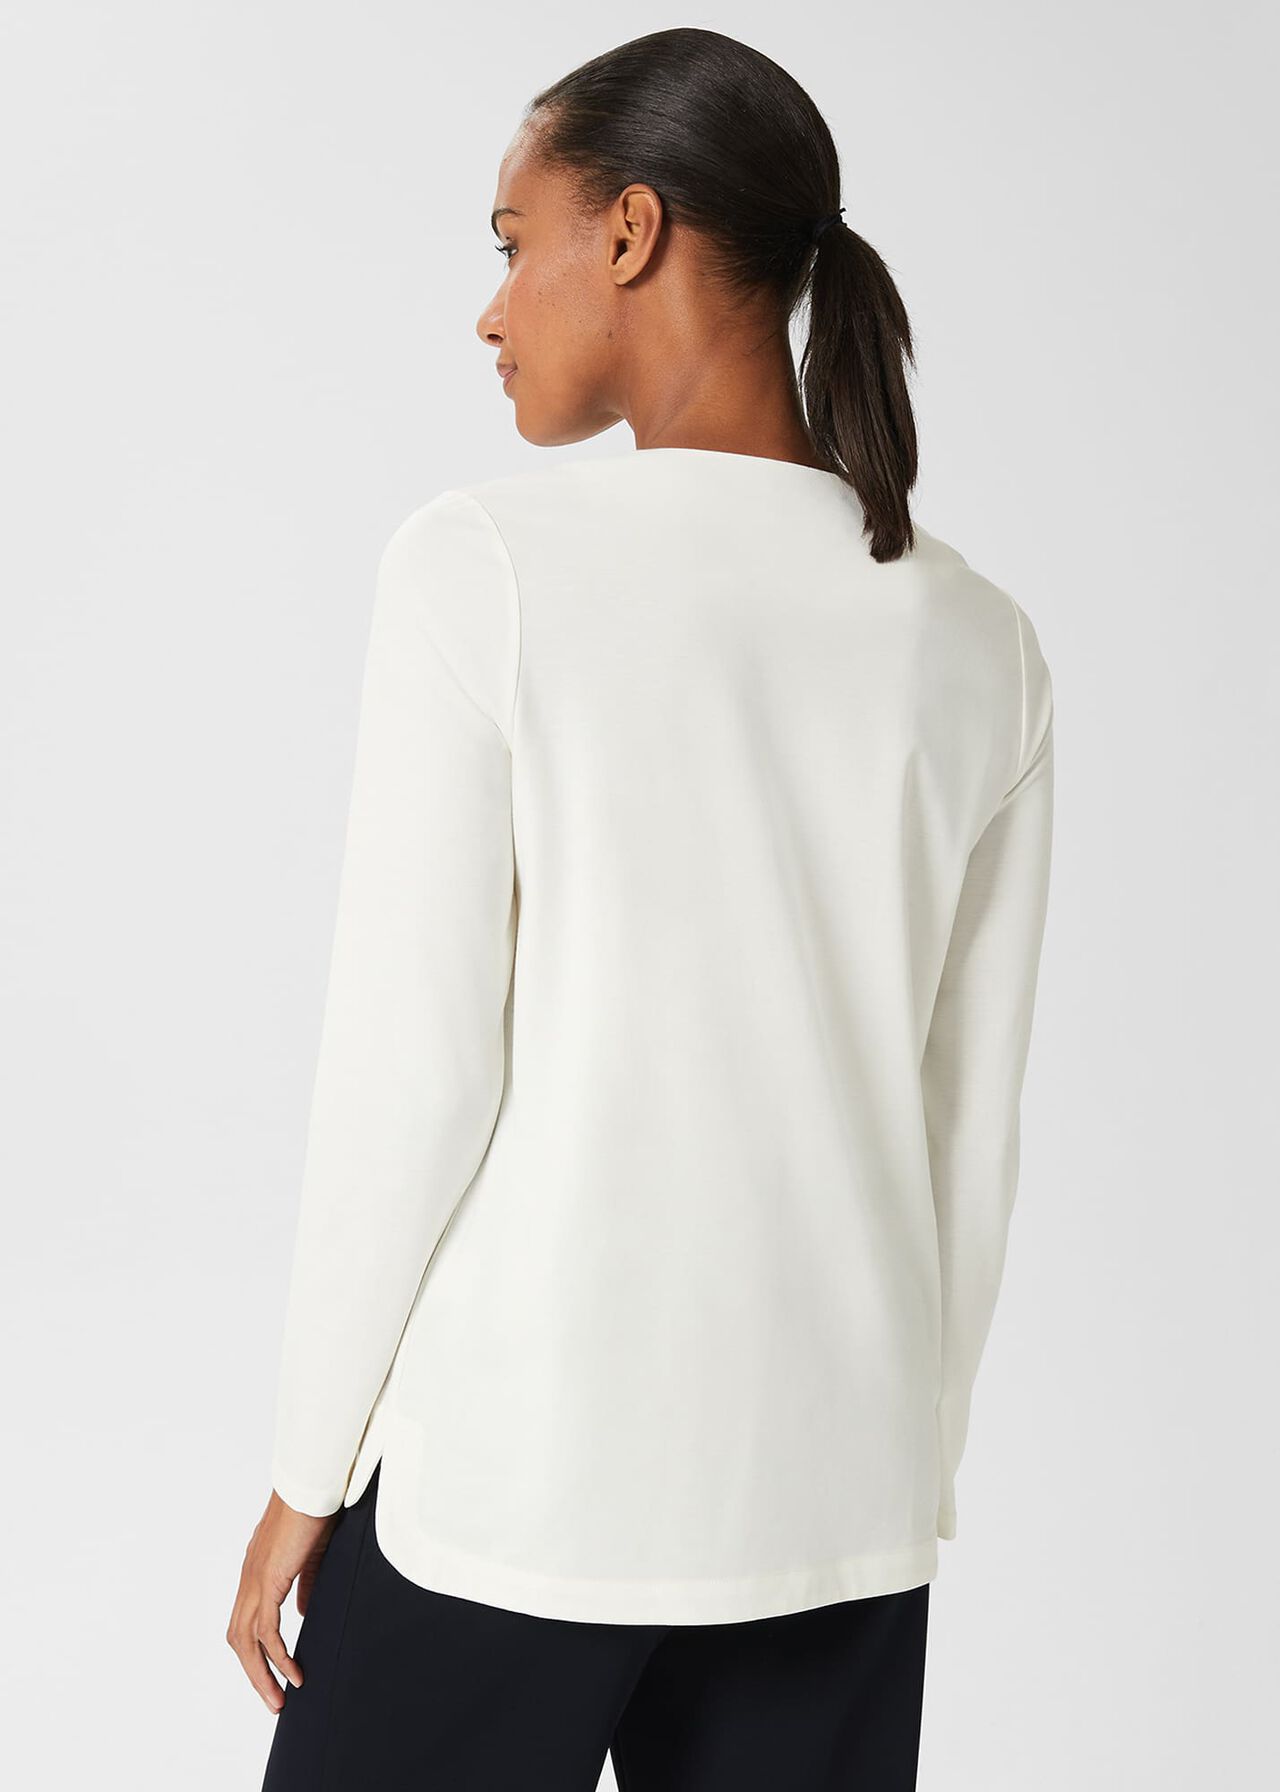 Kelsey Tunic Top, Ivory, hi-res